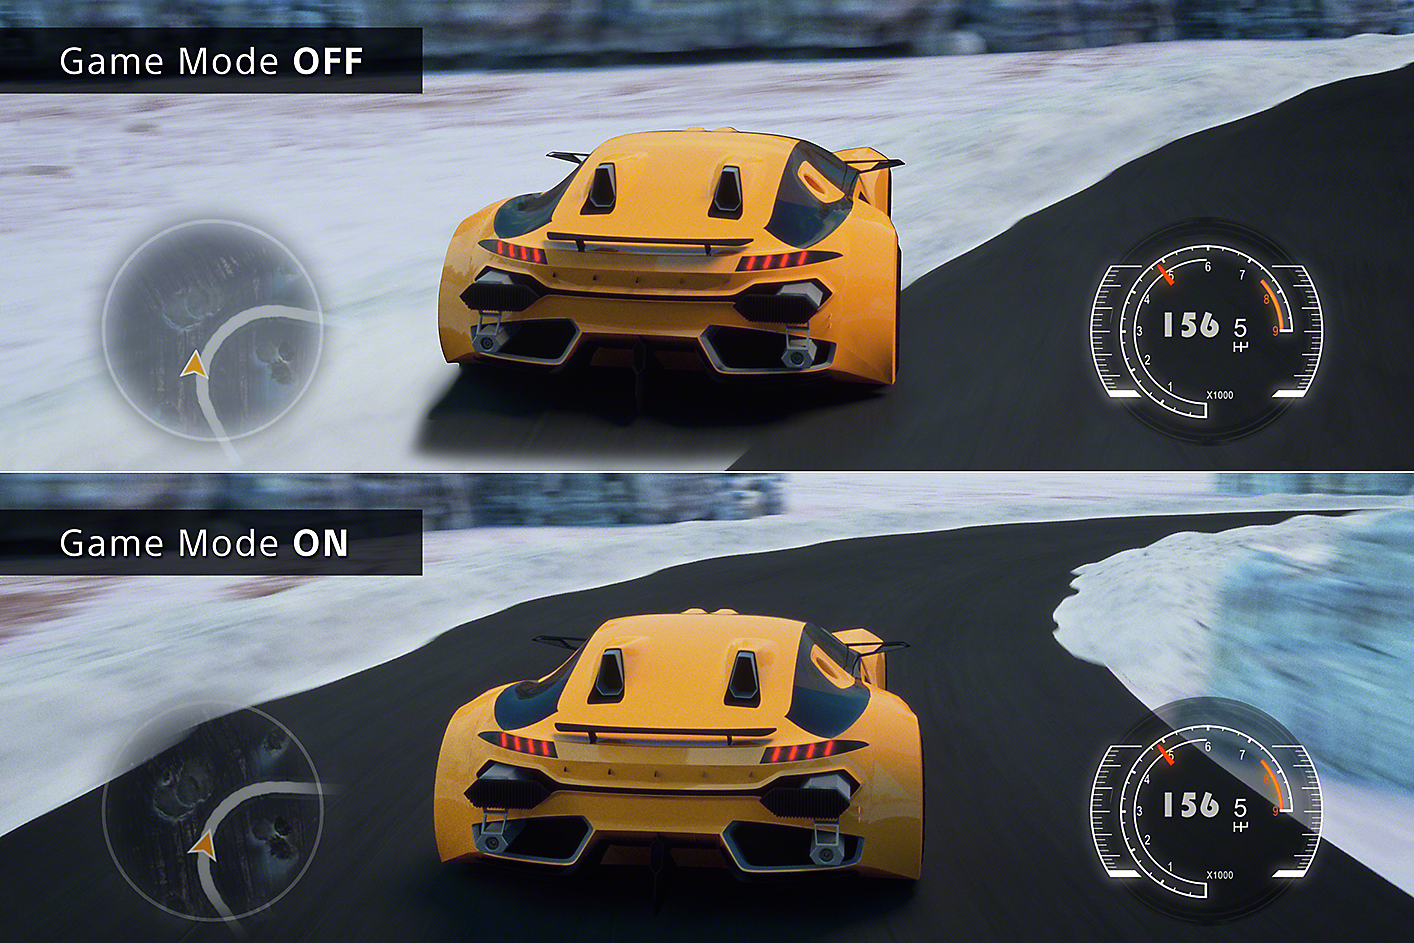 Split image showing two Driving game scenes, one showing a car coming off the track with Game Mode OFF and the other with a car on the track with Game Mode ON